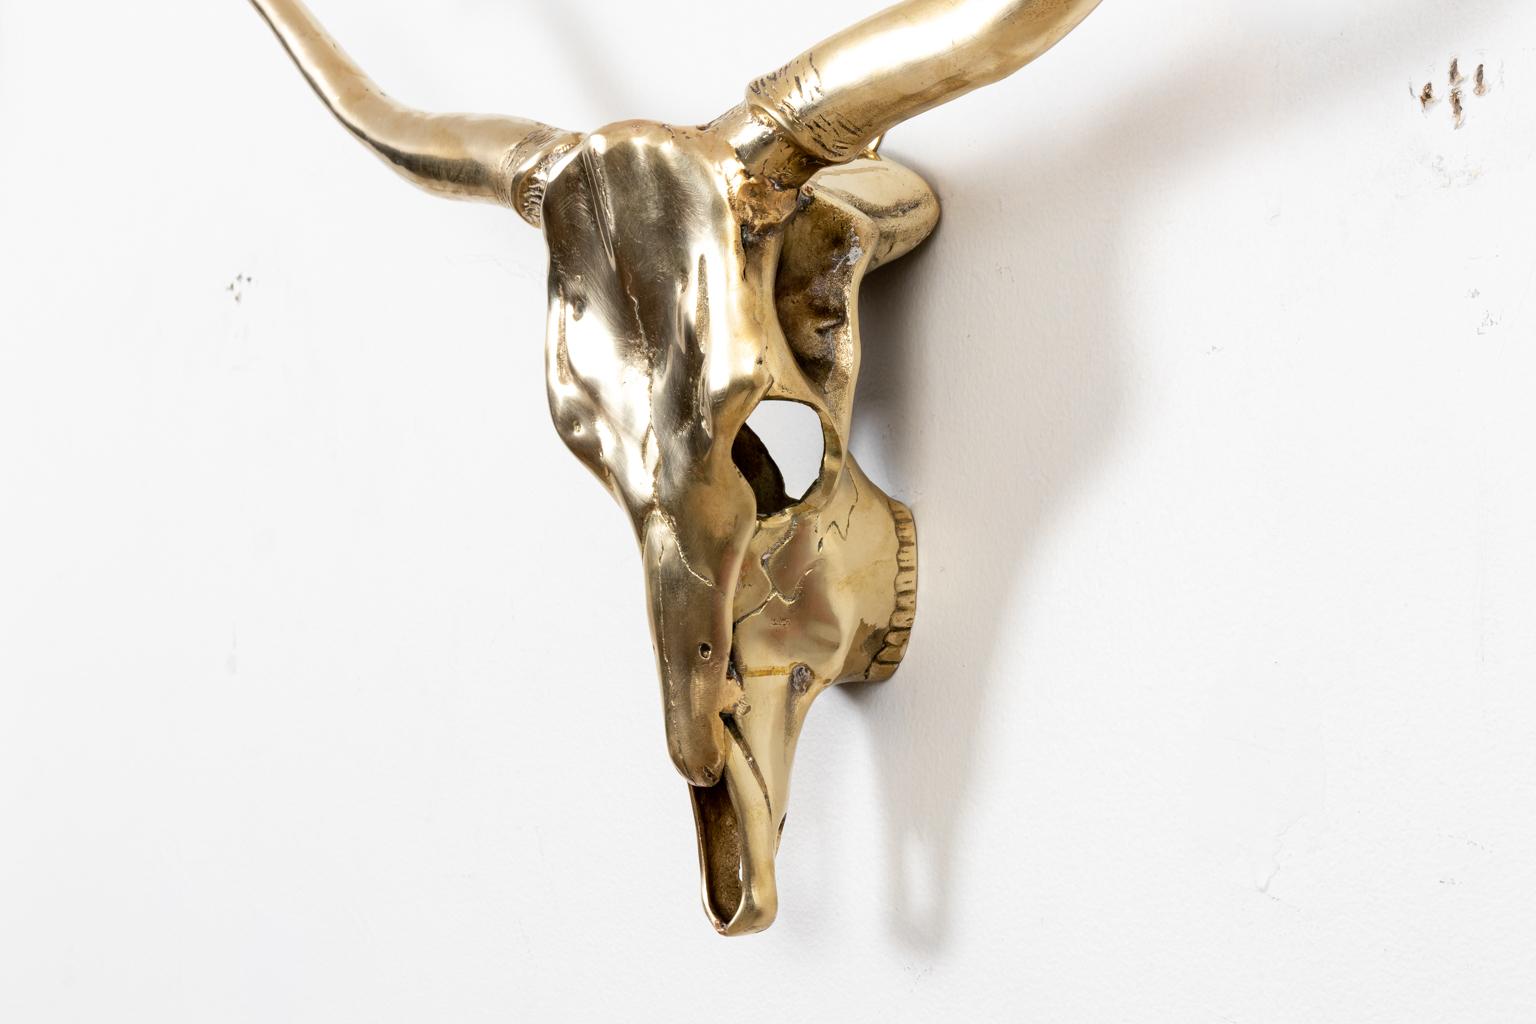 Circa mid-20th century Hollywood Regency style decorative brass longhorn skull wall sculpture in a hand polished finish. Made in Korea. Please note of wear consistent with age. Good overall condition.